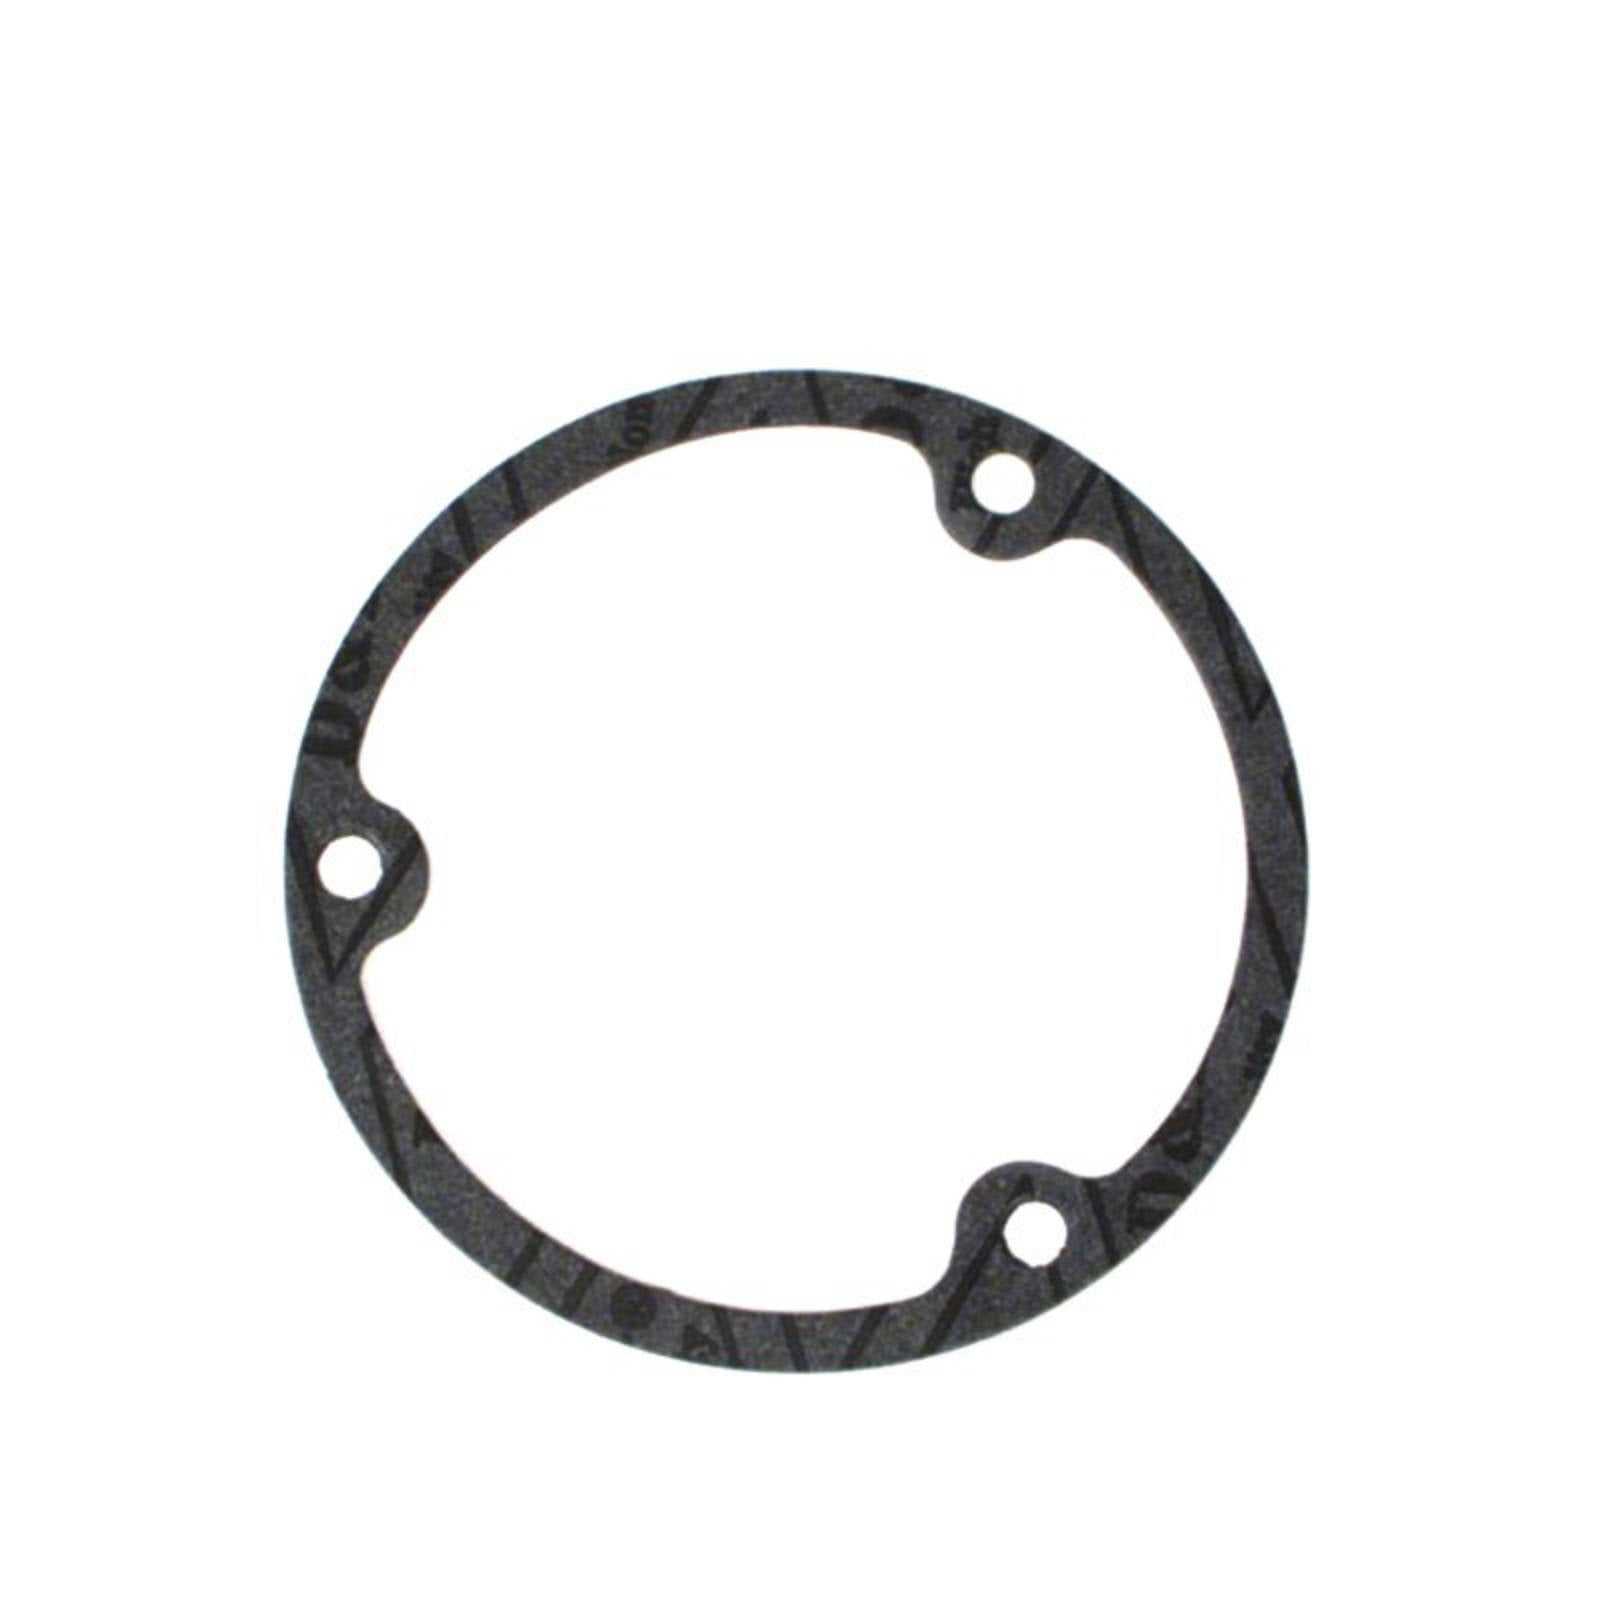 Whites Motorcycle Parts, ROTOR INSPECTION COVER GASKET (sold each)